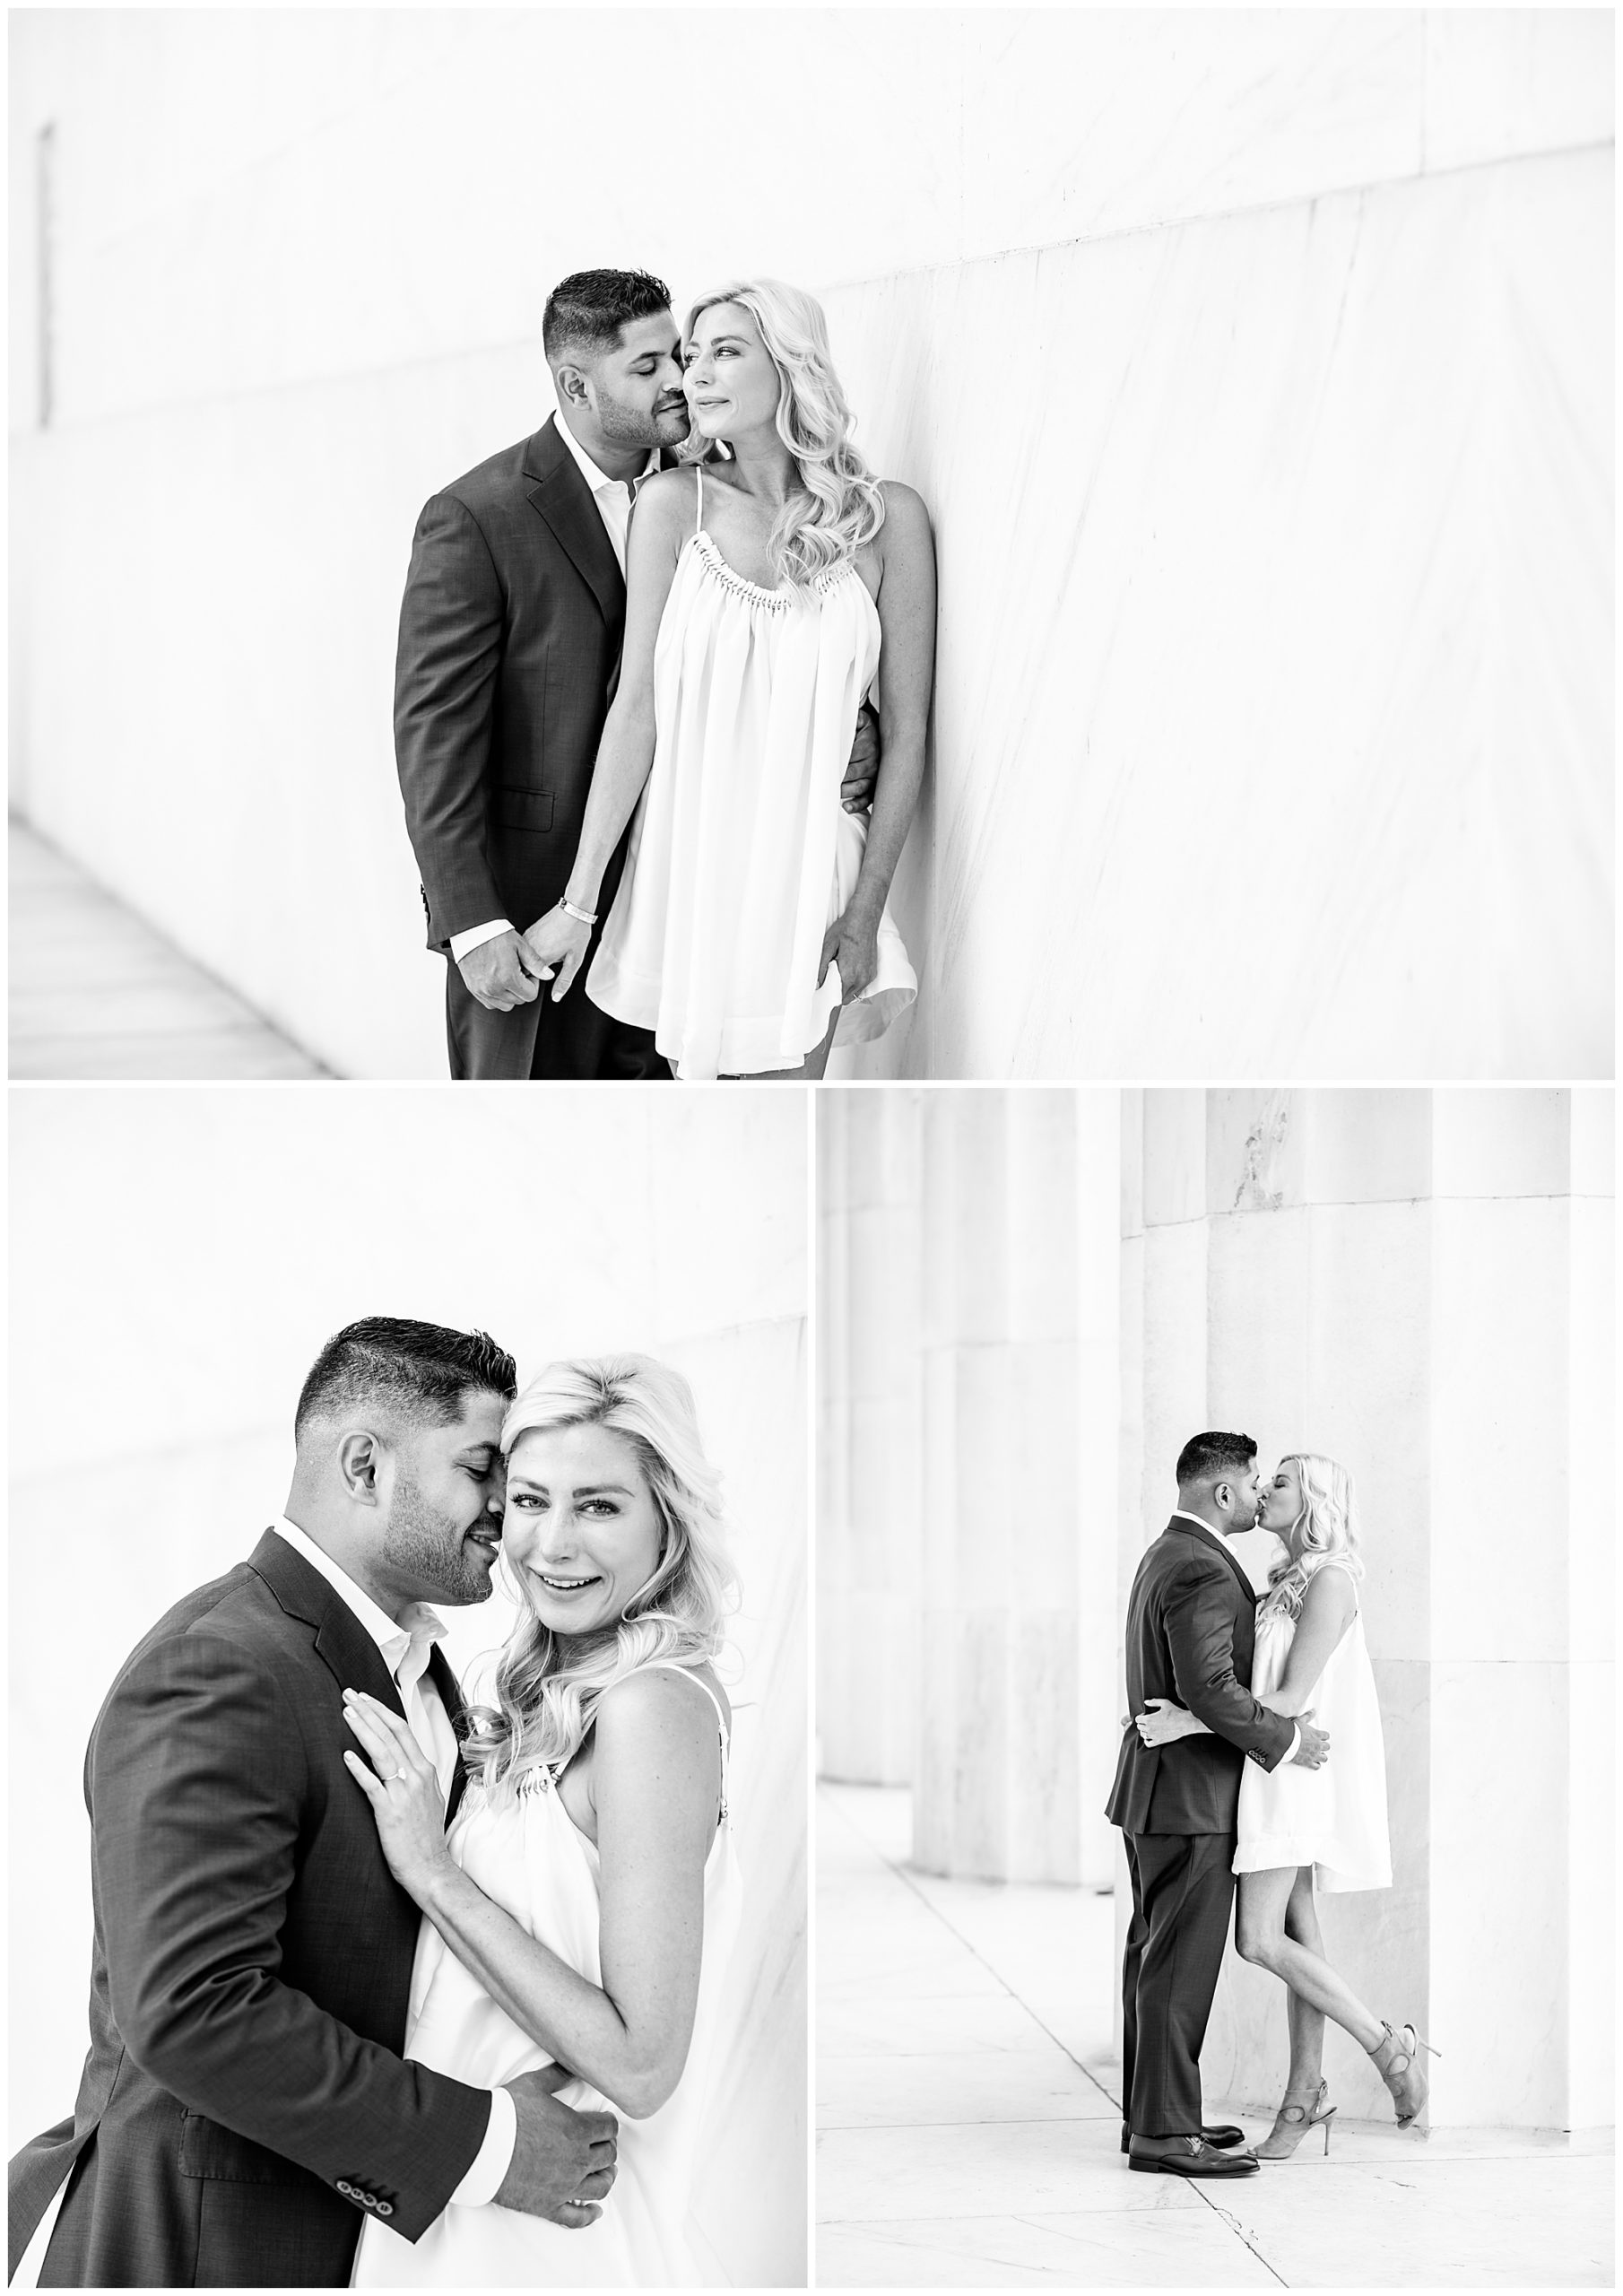 Lincoln Memorial proposal, Lincoln Memorial surprise proposal, DC surprise proposal, surprise proposal DC, DC proposal photographer, DC engagement, DC engagement photographer, Rachel E.H. Photography, summer proposal, proposal ideas, Lincoln Memorial portraits, black and white engagement photos